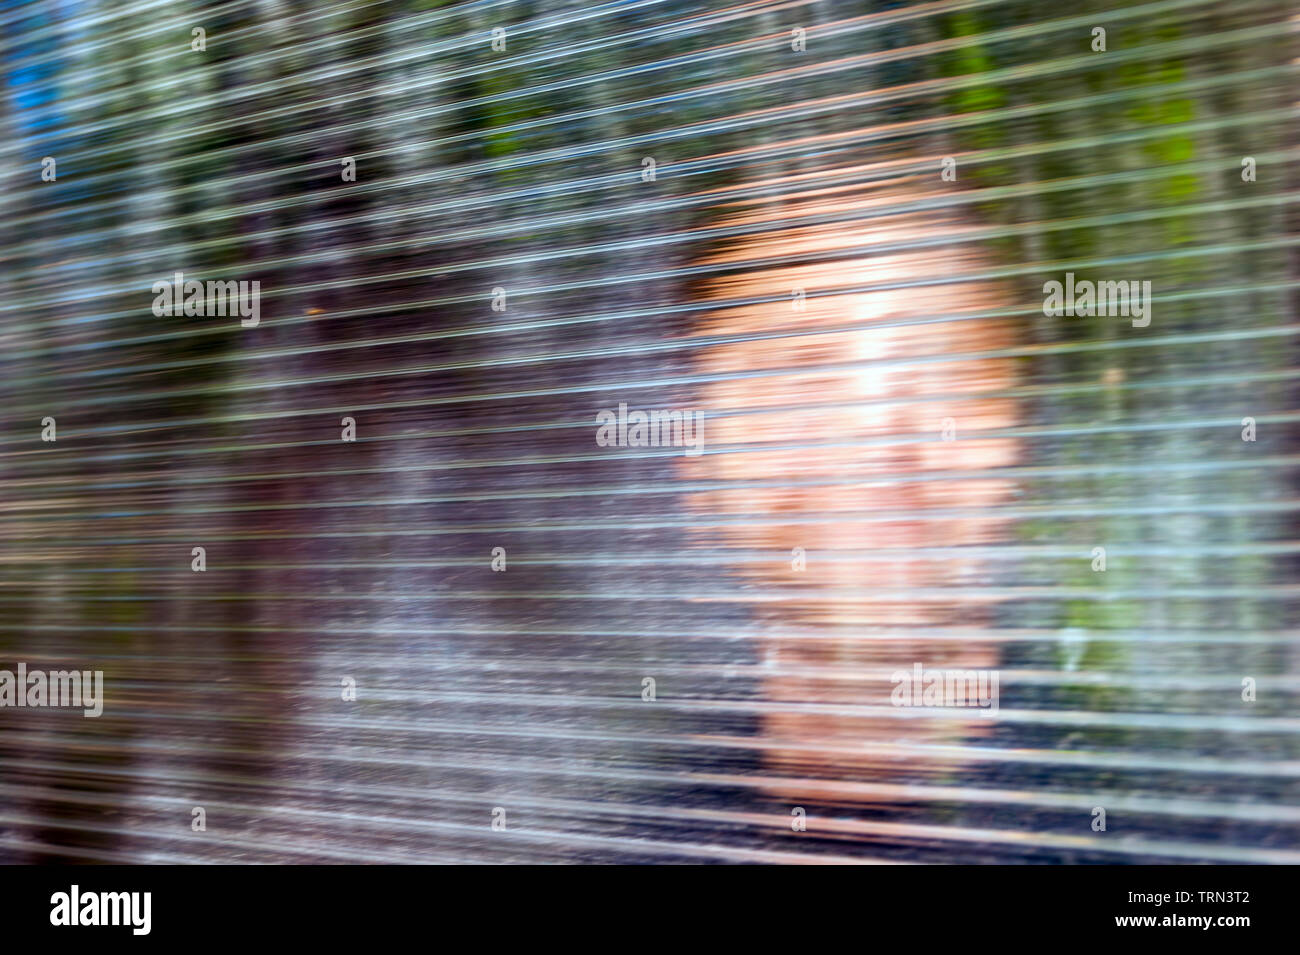 Blurred Smiling Young Face behind Dusty Fluted, Ribbed Glass or Clear Polycarbonate Corrugated Sheet. Online Anonymous, Anon Communication, False Iden Stock Photo